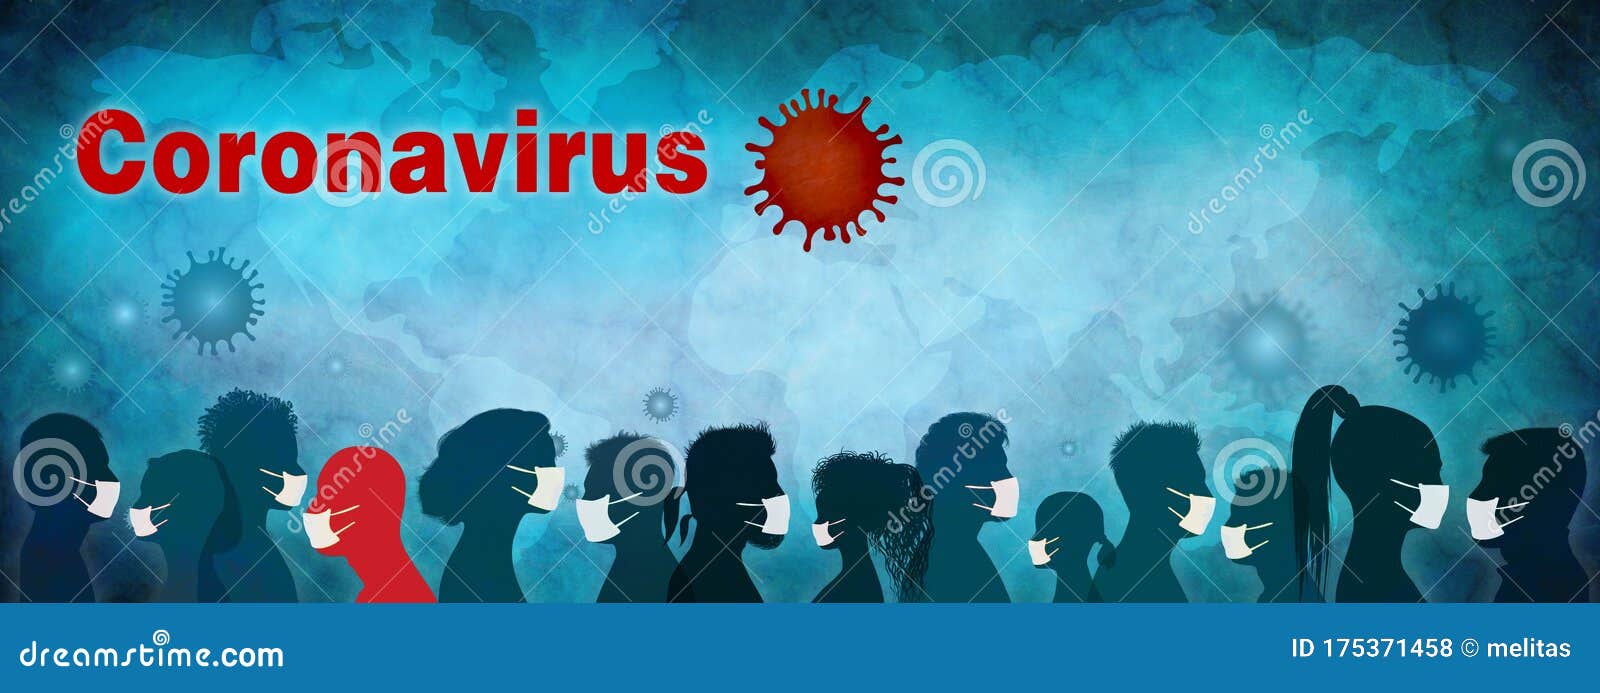 banner. coronavirus epidemic and pandemic. group people diversity wearing medical masks. crowd of people.infection. contagion